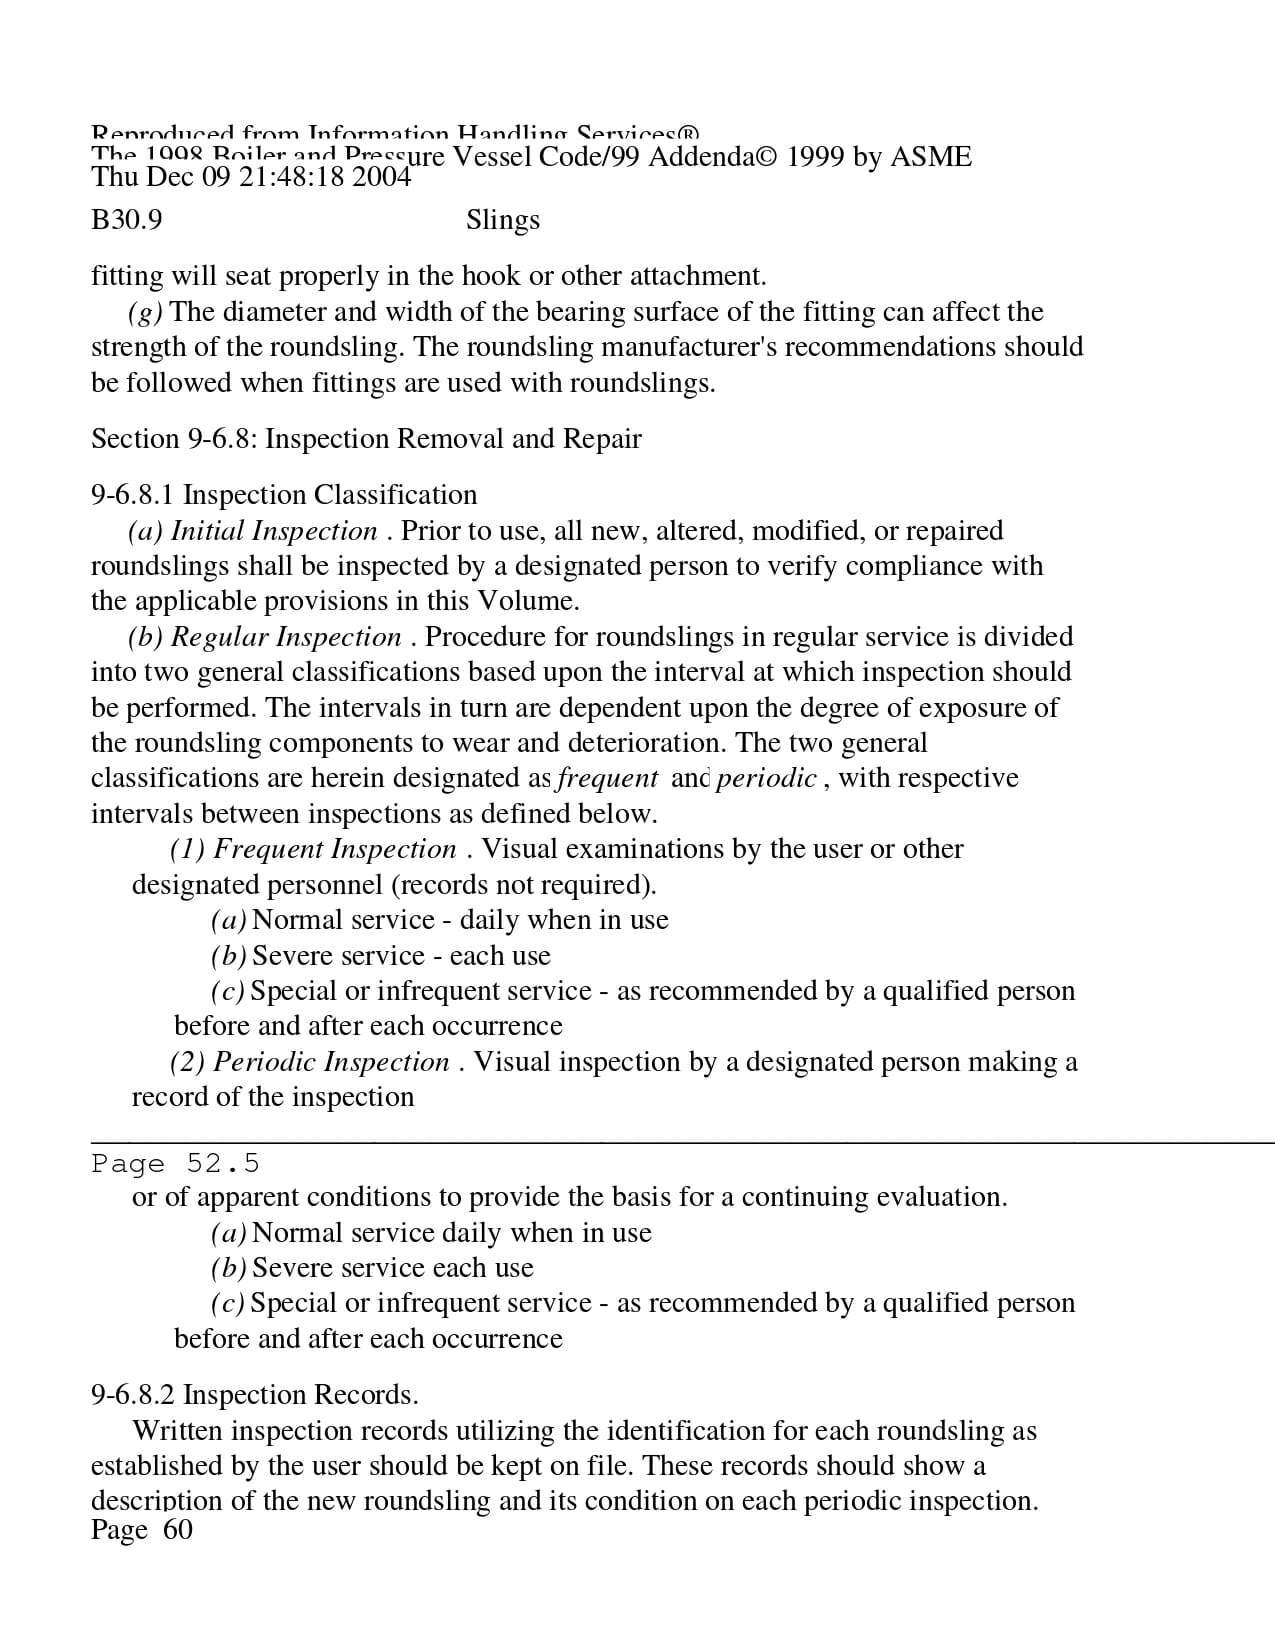 vdocument.in_asme-b309_page-0060